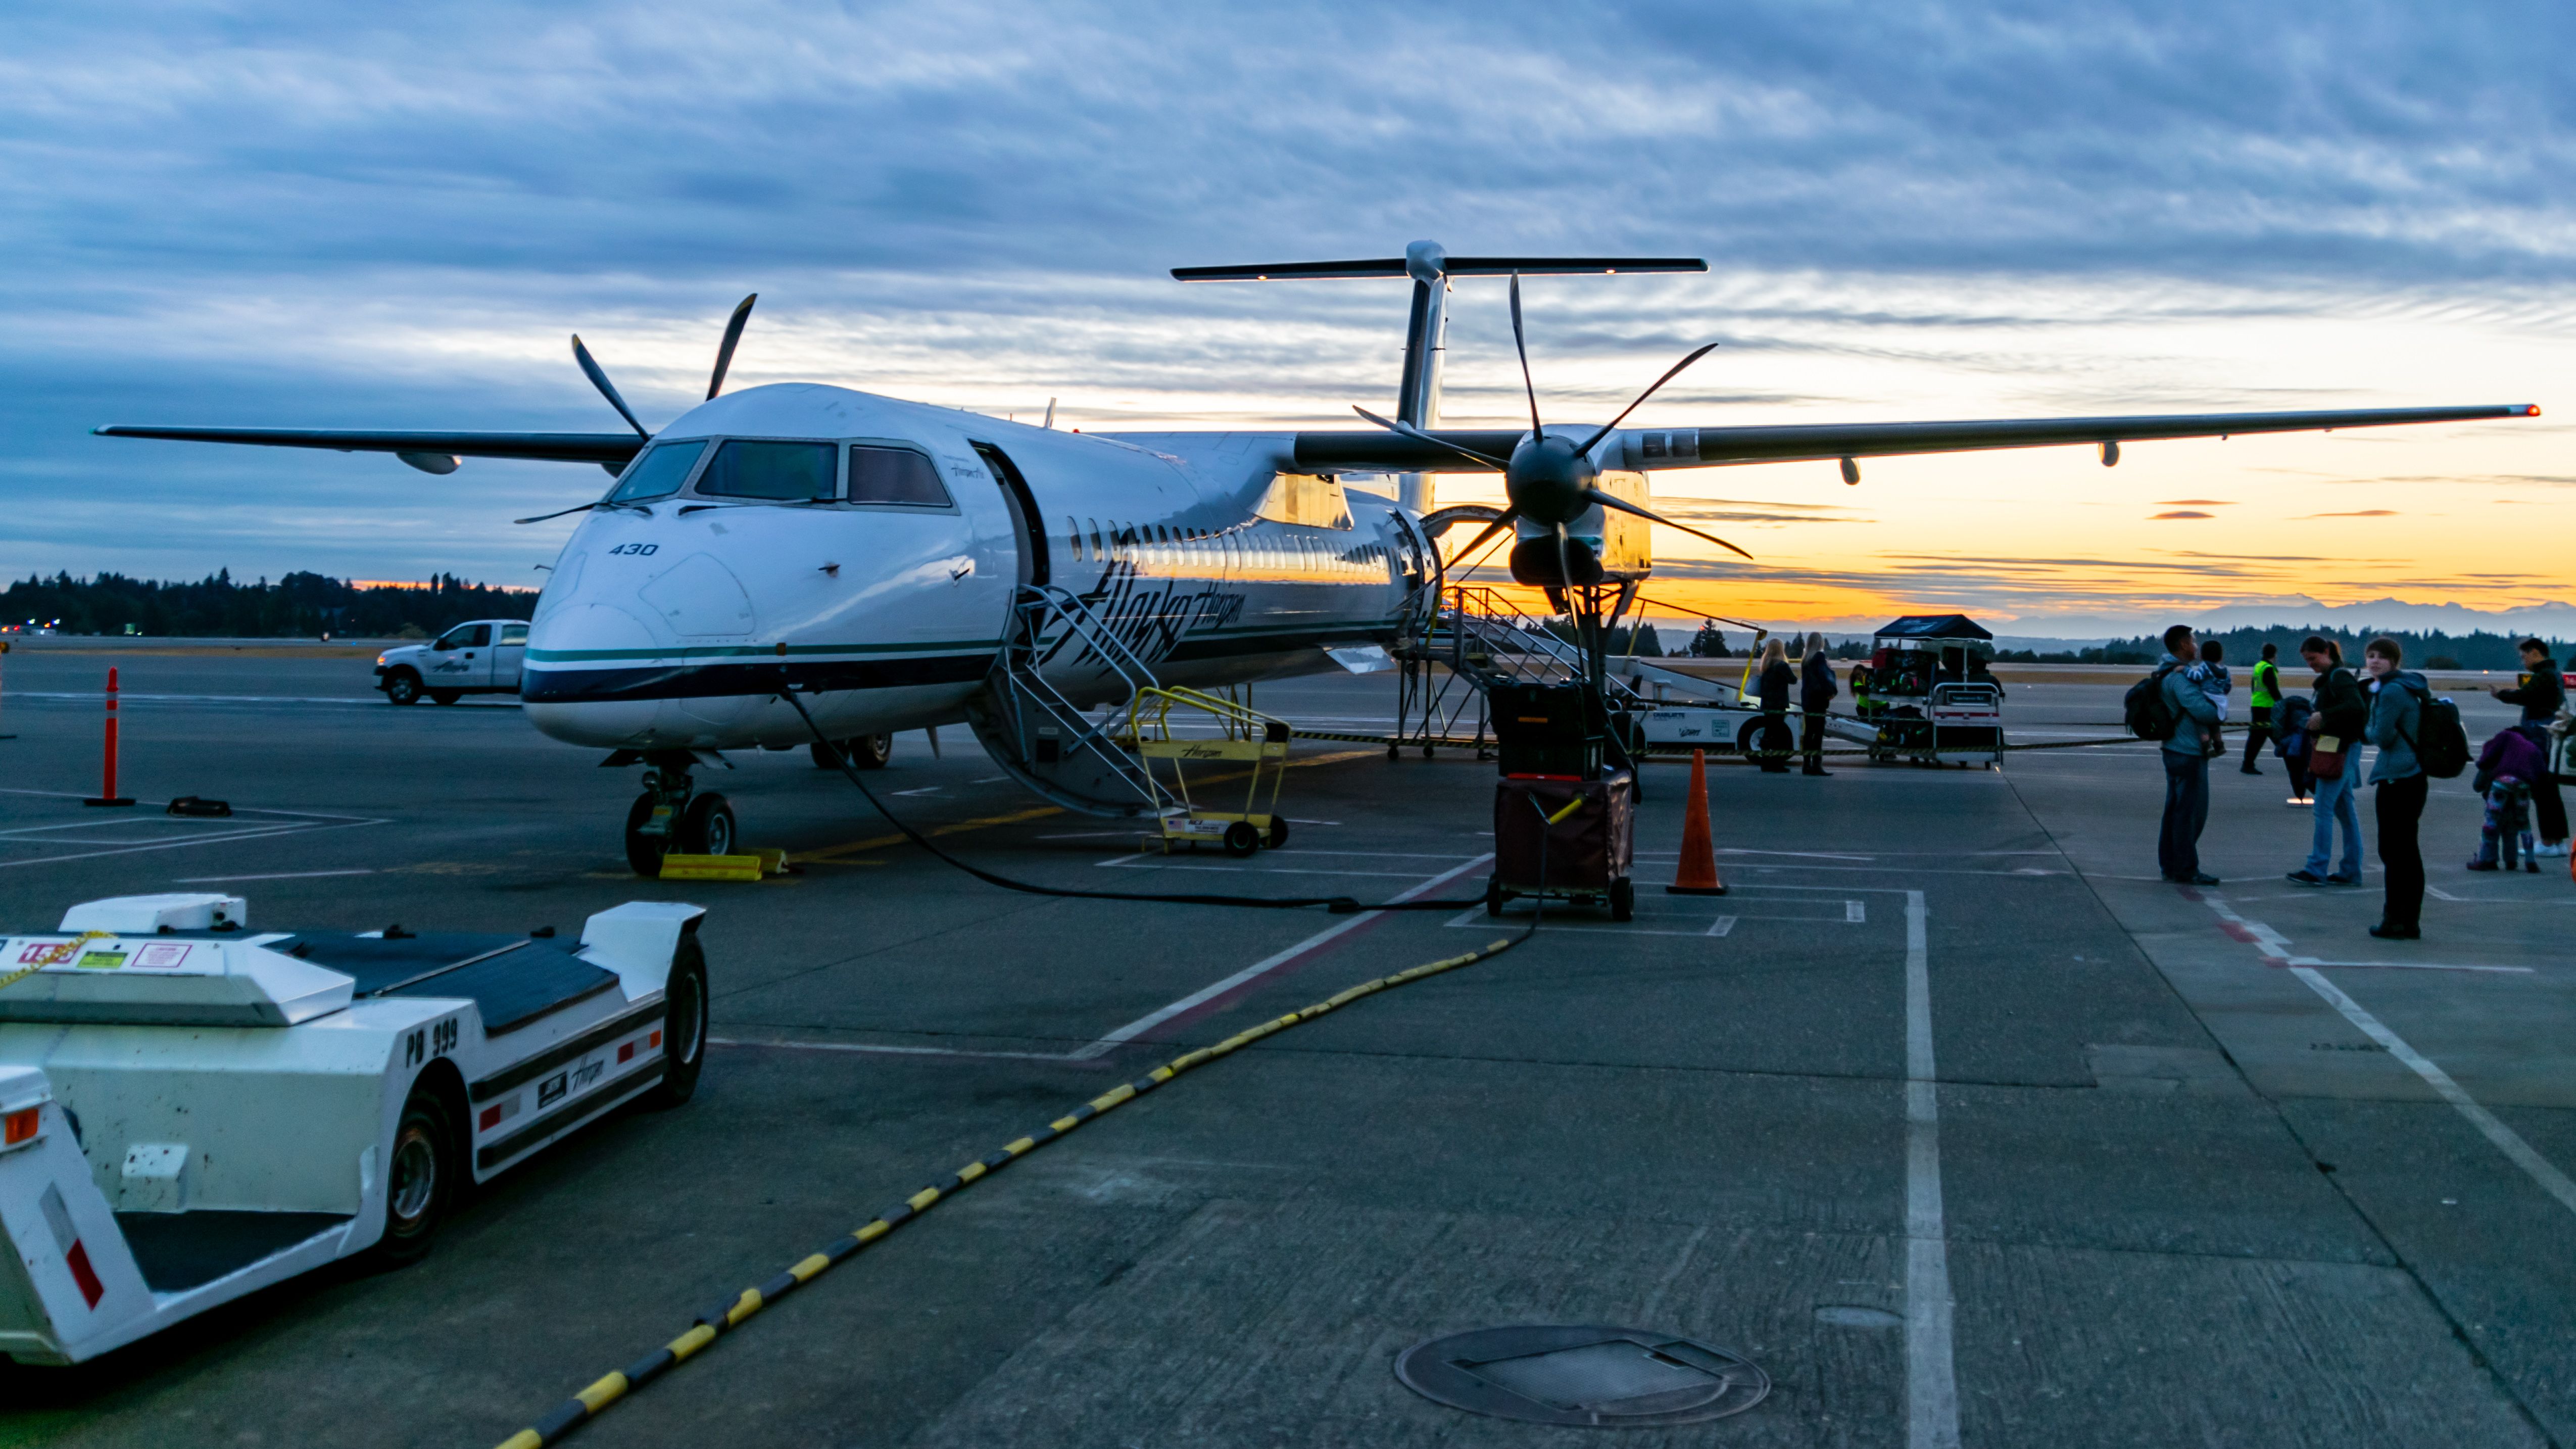 The Sun Is Setting on the Q400 in Alaska Airlines Service